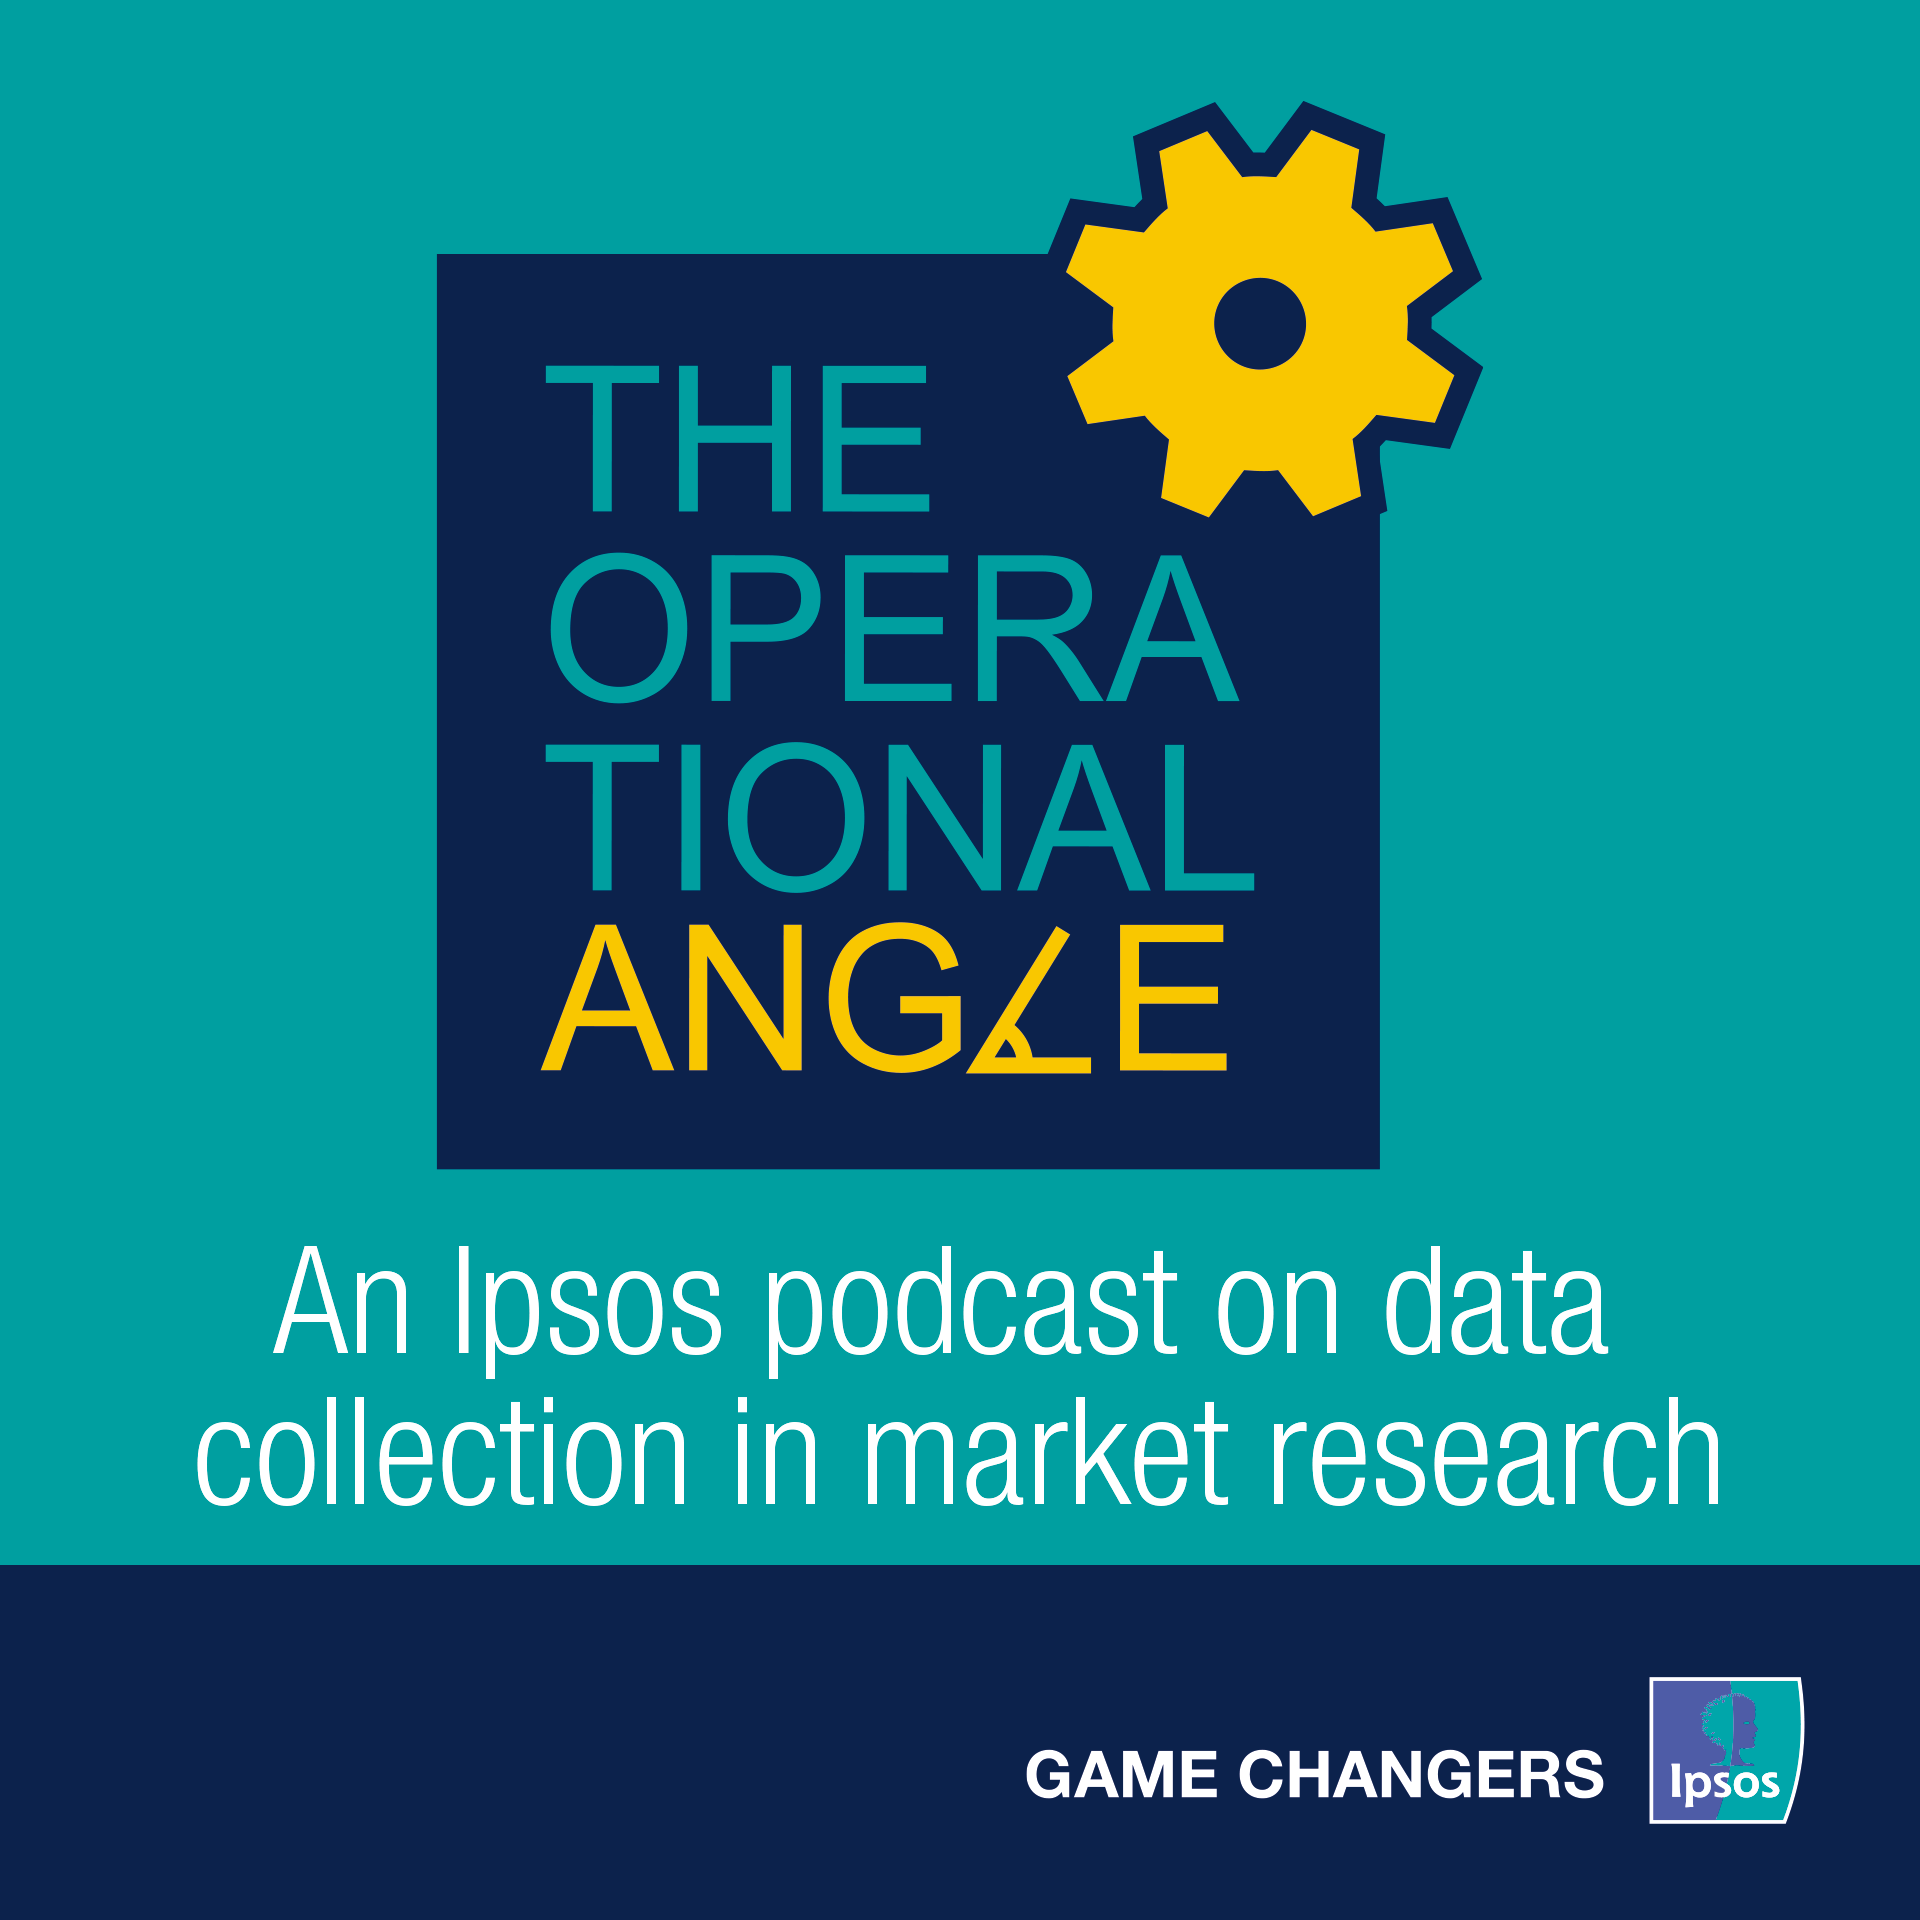 The Operational Angle Podcast